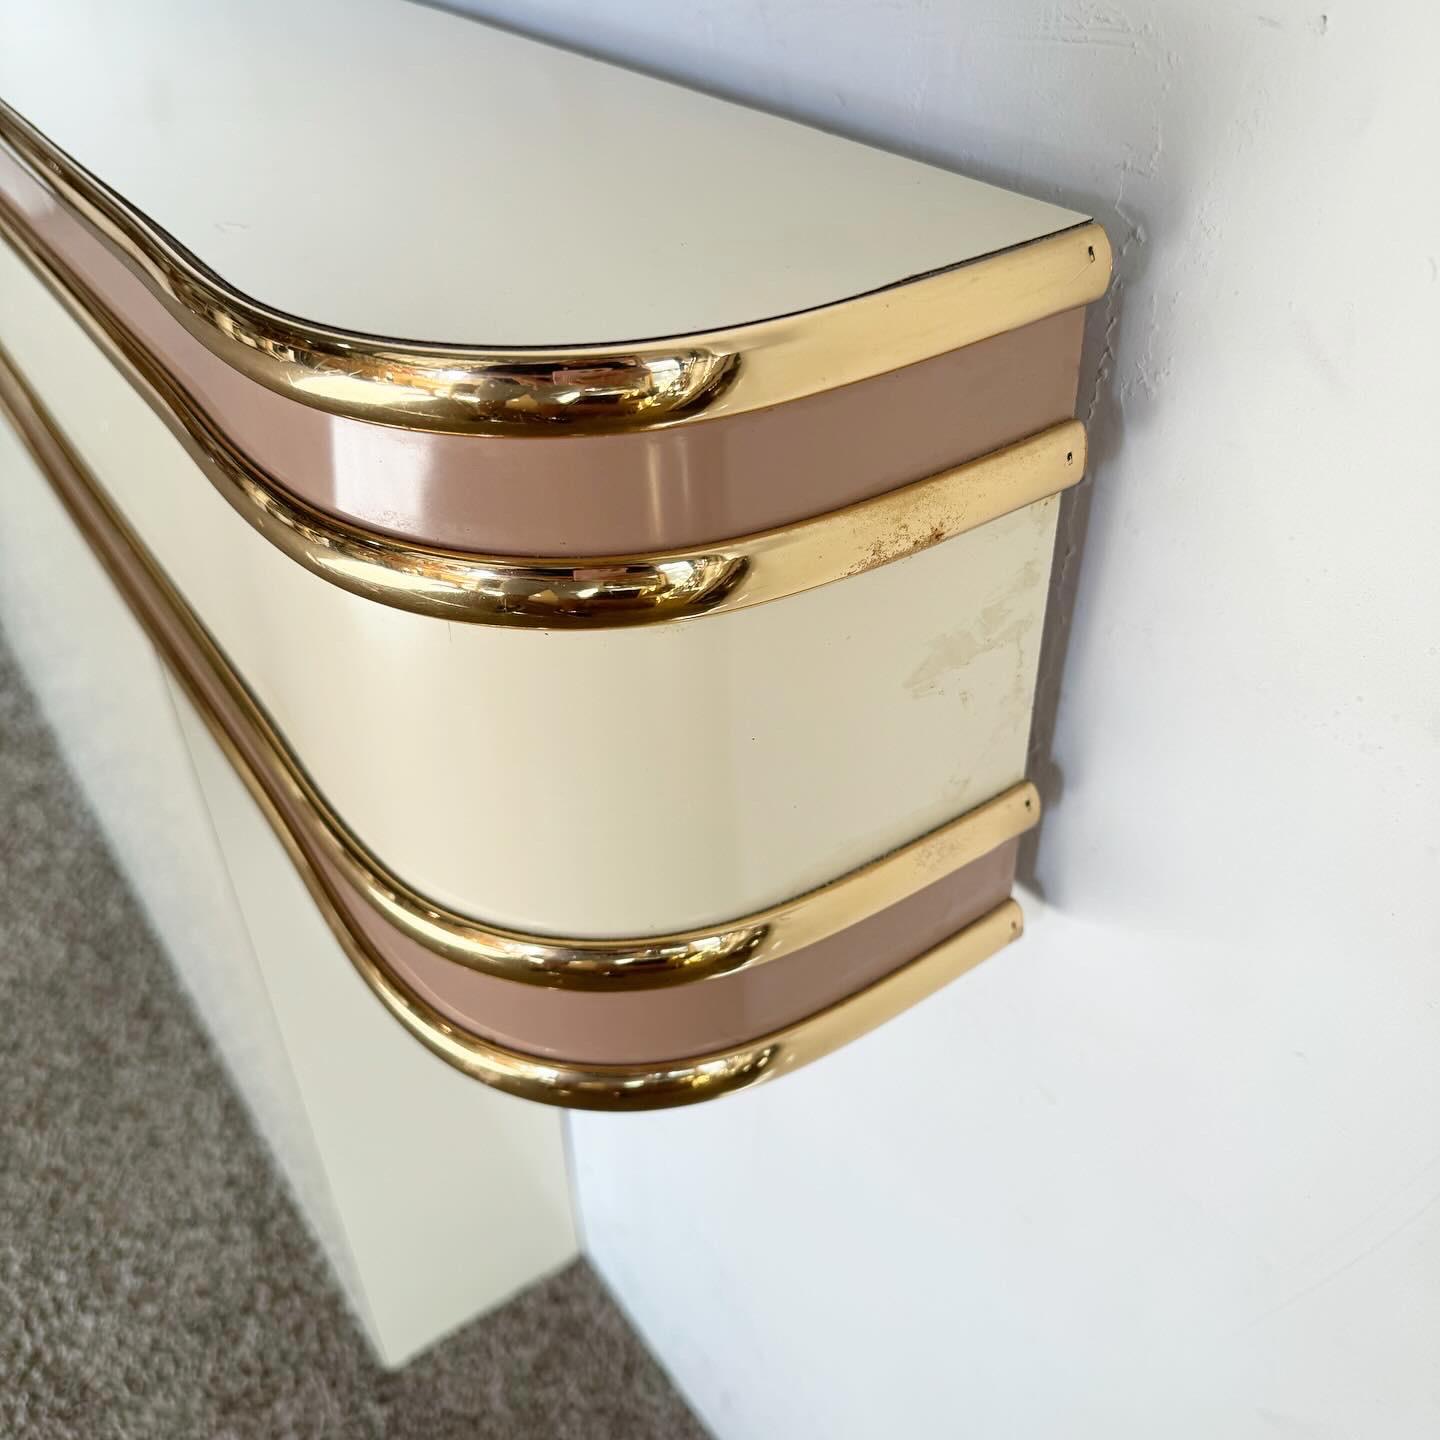 Embrace 80s elegance with the Postmodern Pink & Gold Queen Headboard. Its bold cream and pink lacquer, accented with gold trim, offers a vibrant, luxurious statement for your bedroom. The headboard's unique design and color scheme make it an ideal